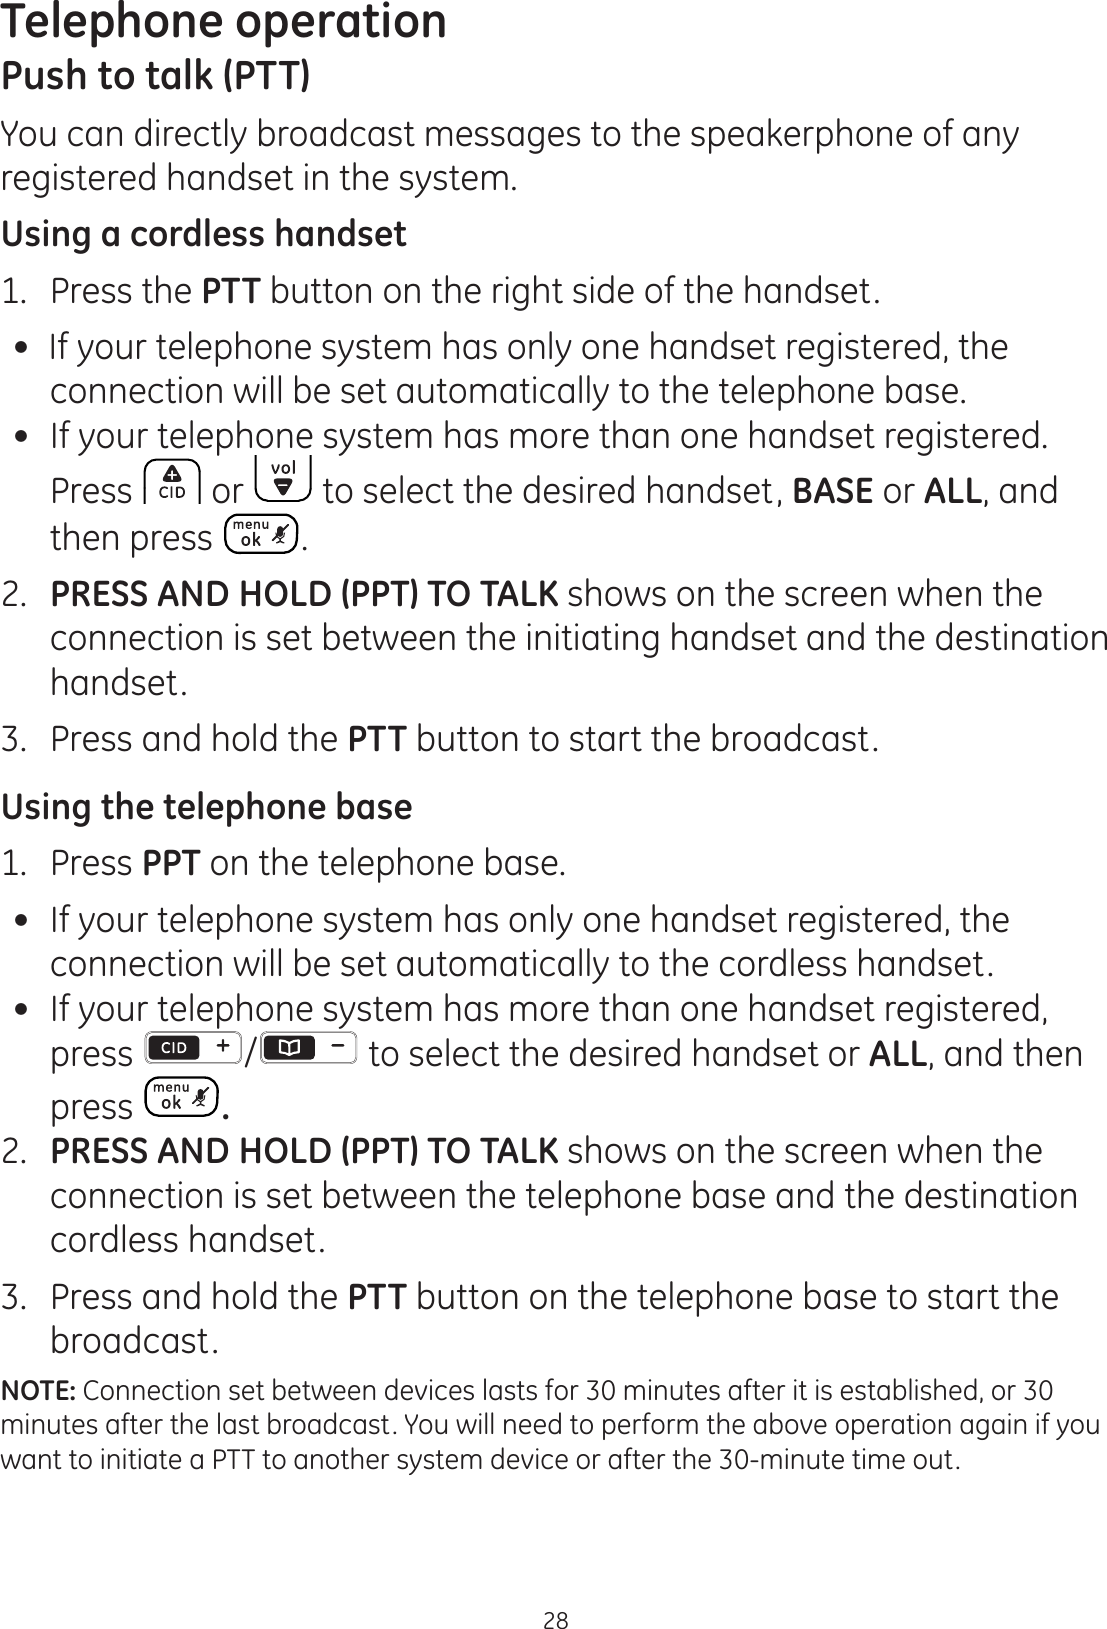 Telephone operation28Push to talk (PTT)You can directly broadcast messages to the speakerphone of any registered handset in the system. Using a cordless handset1.   Press the PTT button on the right side of the handset. If your telephone system has only one handset registered, the connection will be set automatically to the telephone base.  If your telephone system has more than one handset registered.  Press  or   to select the desired handset, BASE or ALL, and then press  .  2.   PRESS AND HOLD (PPT) TO TALK shows on the screen when the connection is set between the initiating handset and the destination handset. 3.   Press and hold the PTT button to start the broadcast. Using the telephone base1.  Press PPT on the telephone base.  If your telephone system has only one handset registered, the connection will be set automatically to the cordless handset.  If your telephone system has more than one handset registered, press  /  to select the desired handset or ALL, and then press  .2.  PRESS AND HOLD (PPT) TO TALK shows on the screen when the connection is set between the telephone base and the destination cordless handset.3.  Press and hold the PTT button on the telephone base to start the broadcast. NOTE: Connection set between devices lasts for 30 minutes after it is established, or 30 minutes after the last broadcast. You will need to perform the above operation again if you want to initiate a PTT to another system device or after the 30-minute time out. 